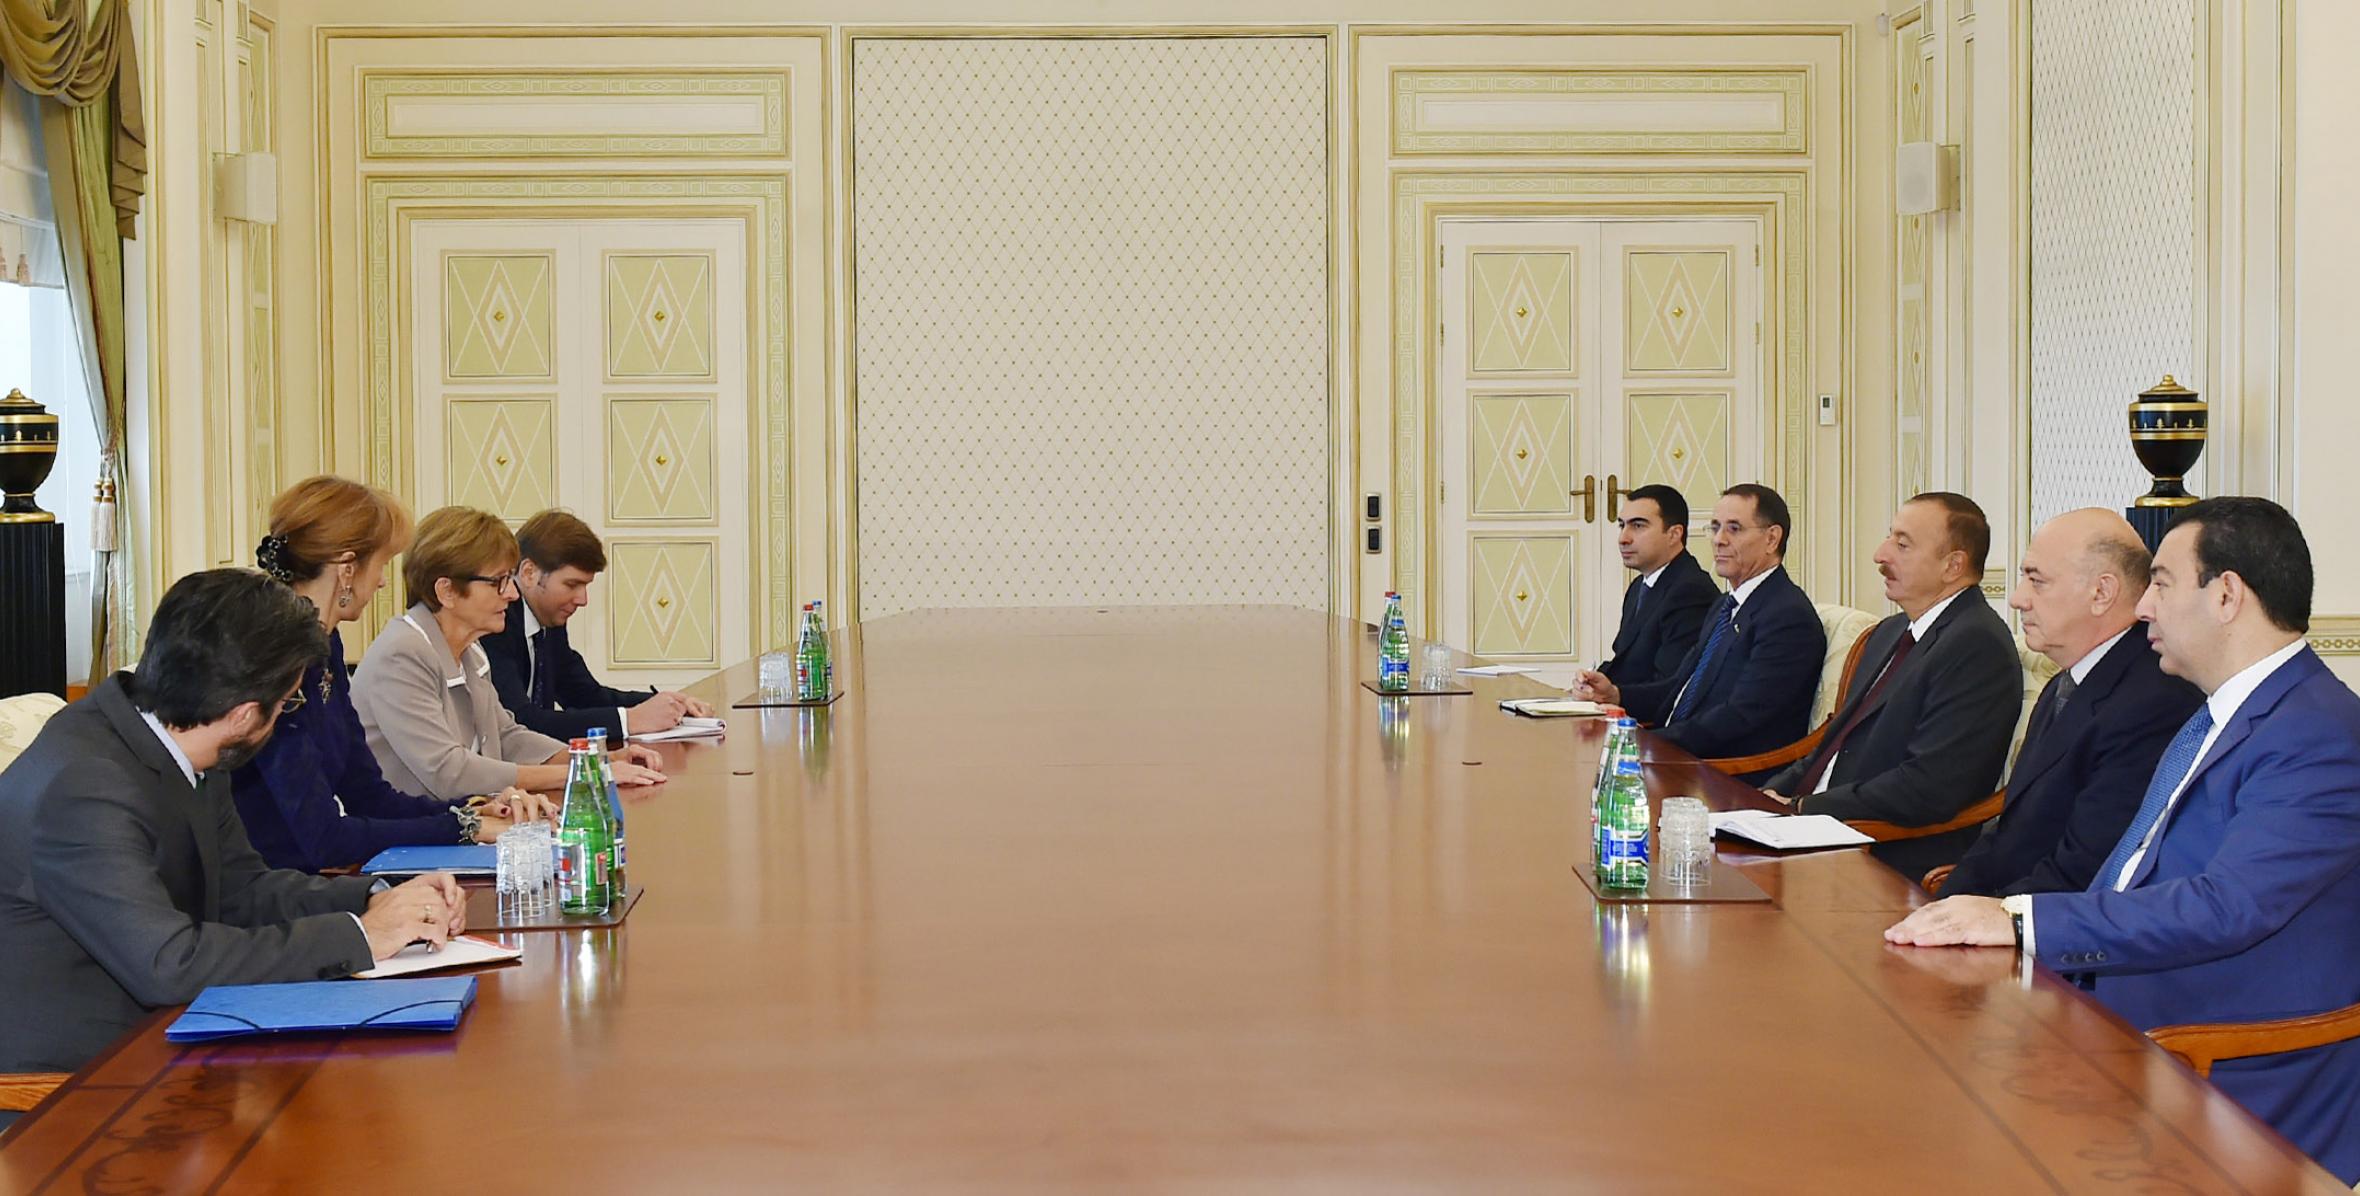 Ilham Aliyev received a delegation led by the President of the Parliamentary Assembly of the Council of Europe